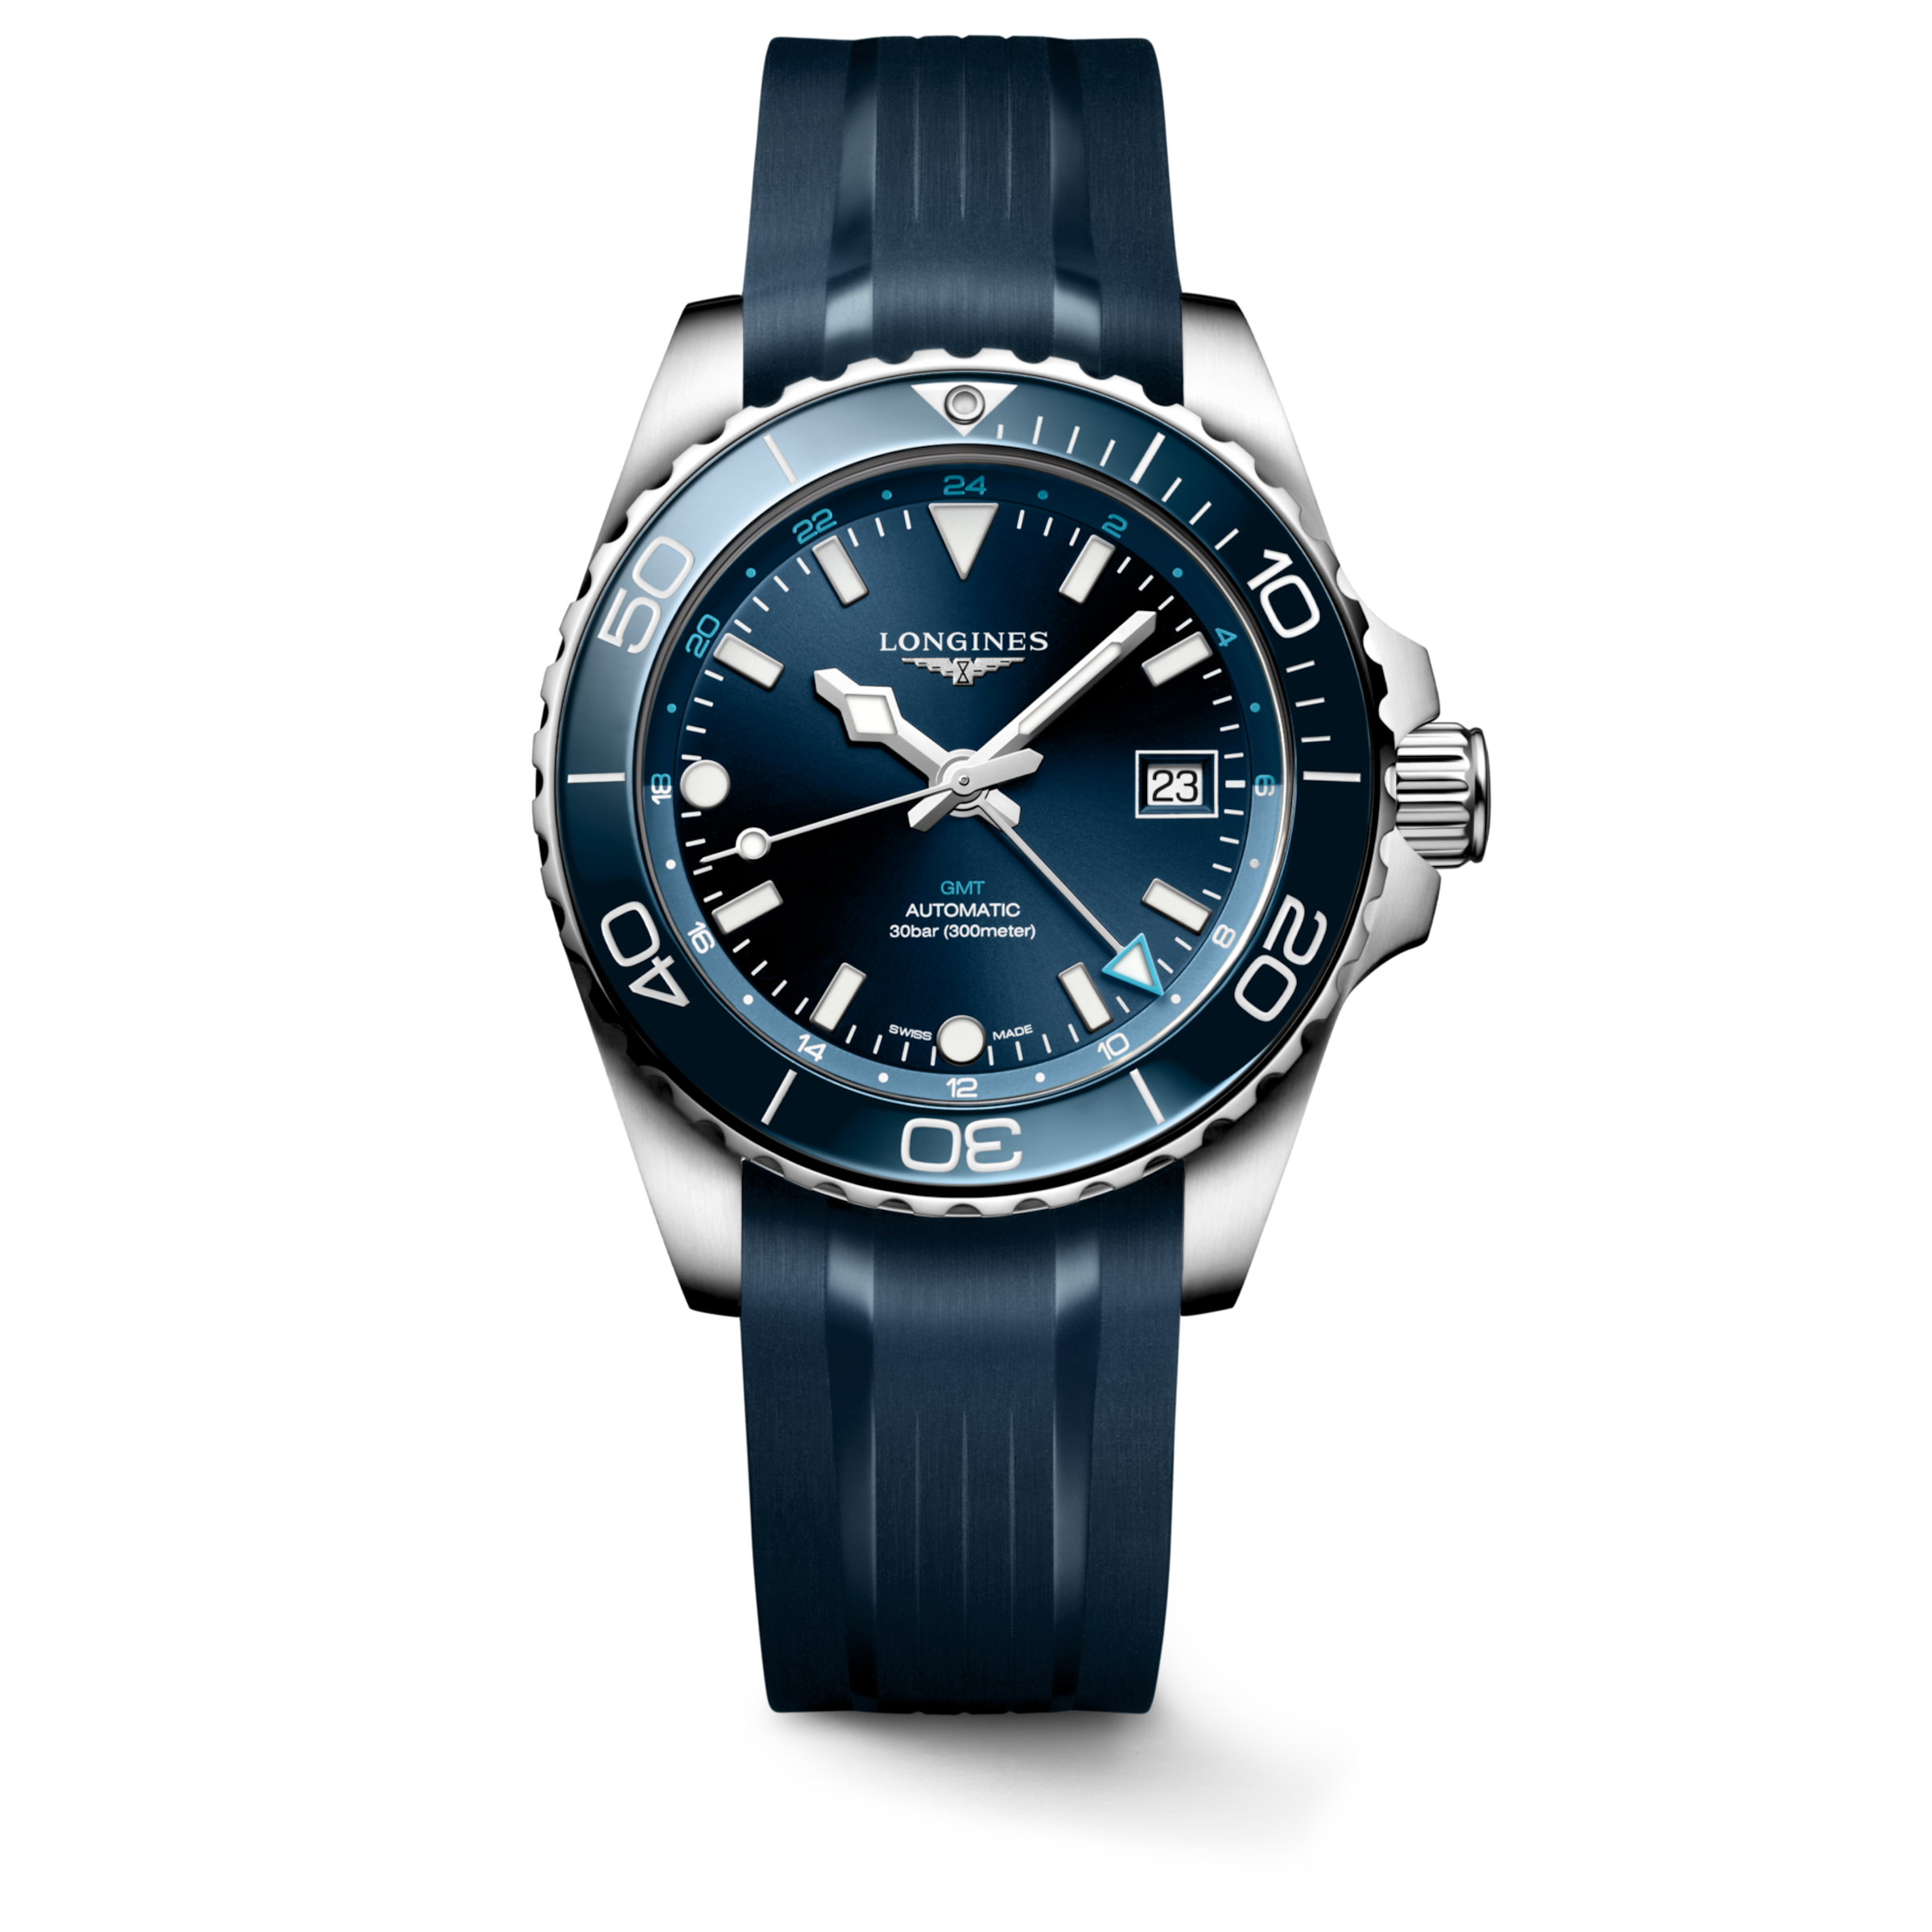 Longines HYDROCONQUEST Automatic Stainless steel and ceramic bezel Watch - L3.790.4.96.9